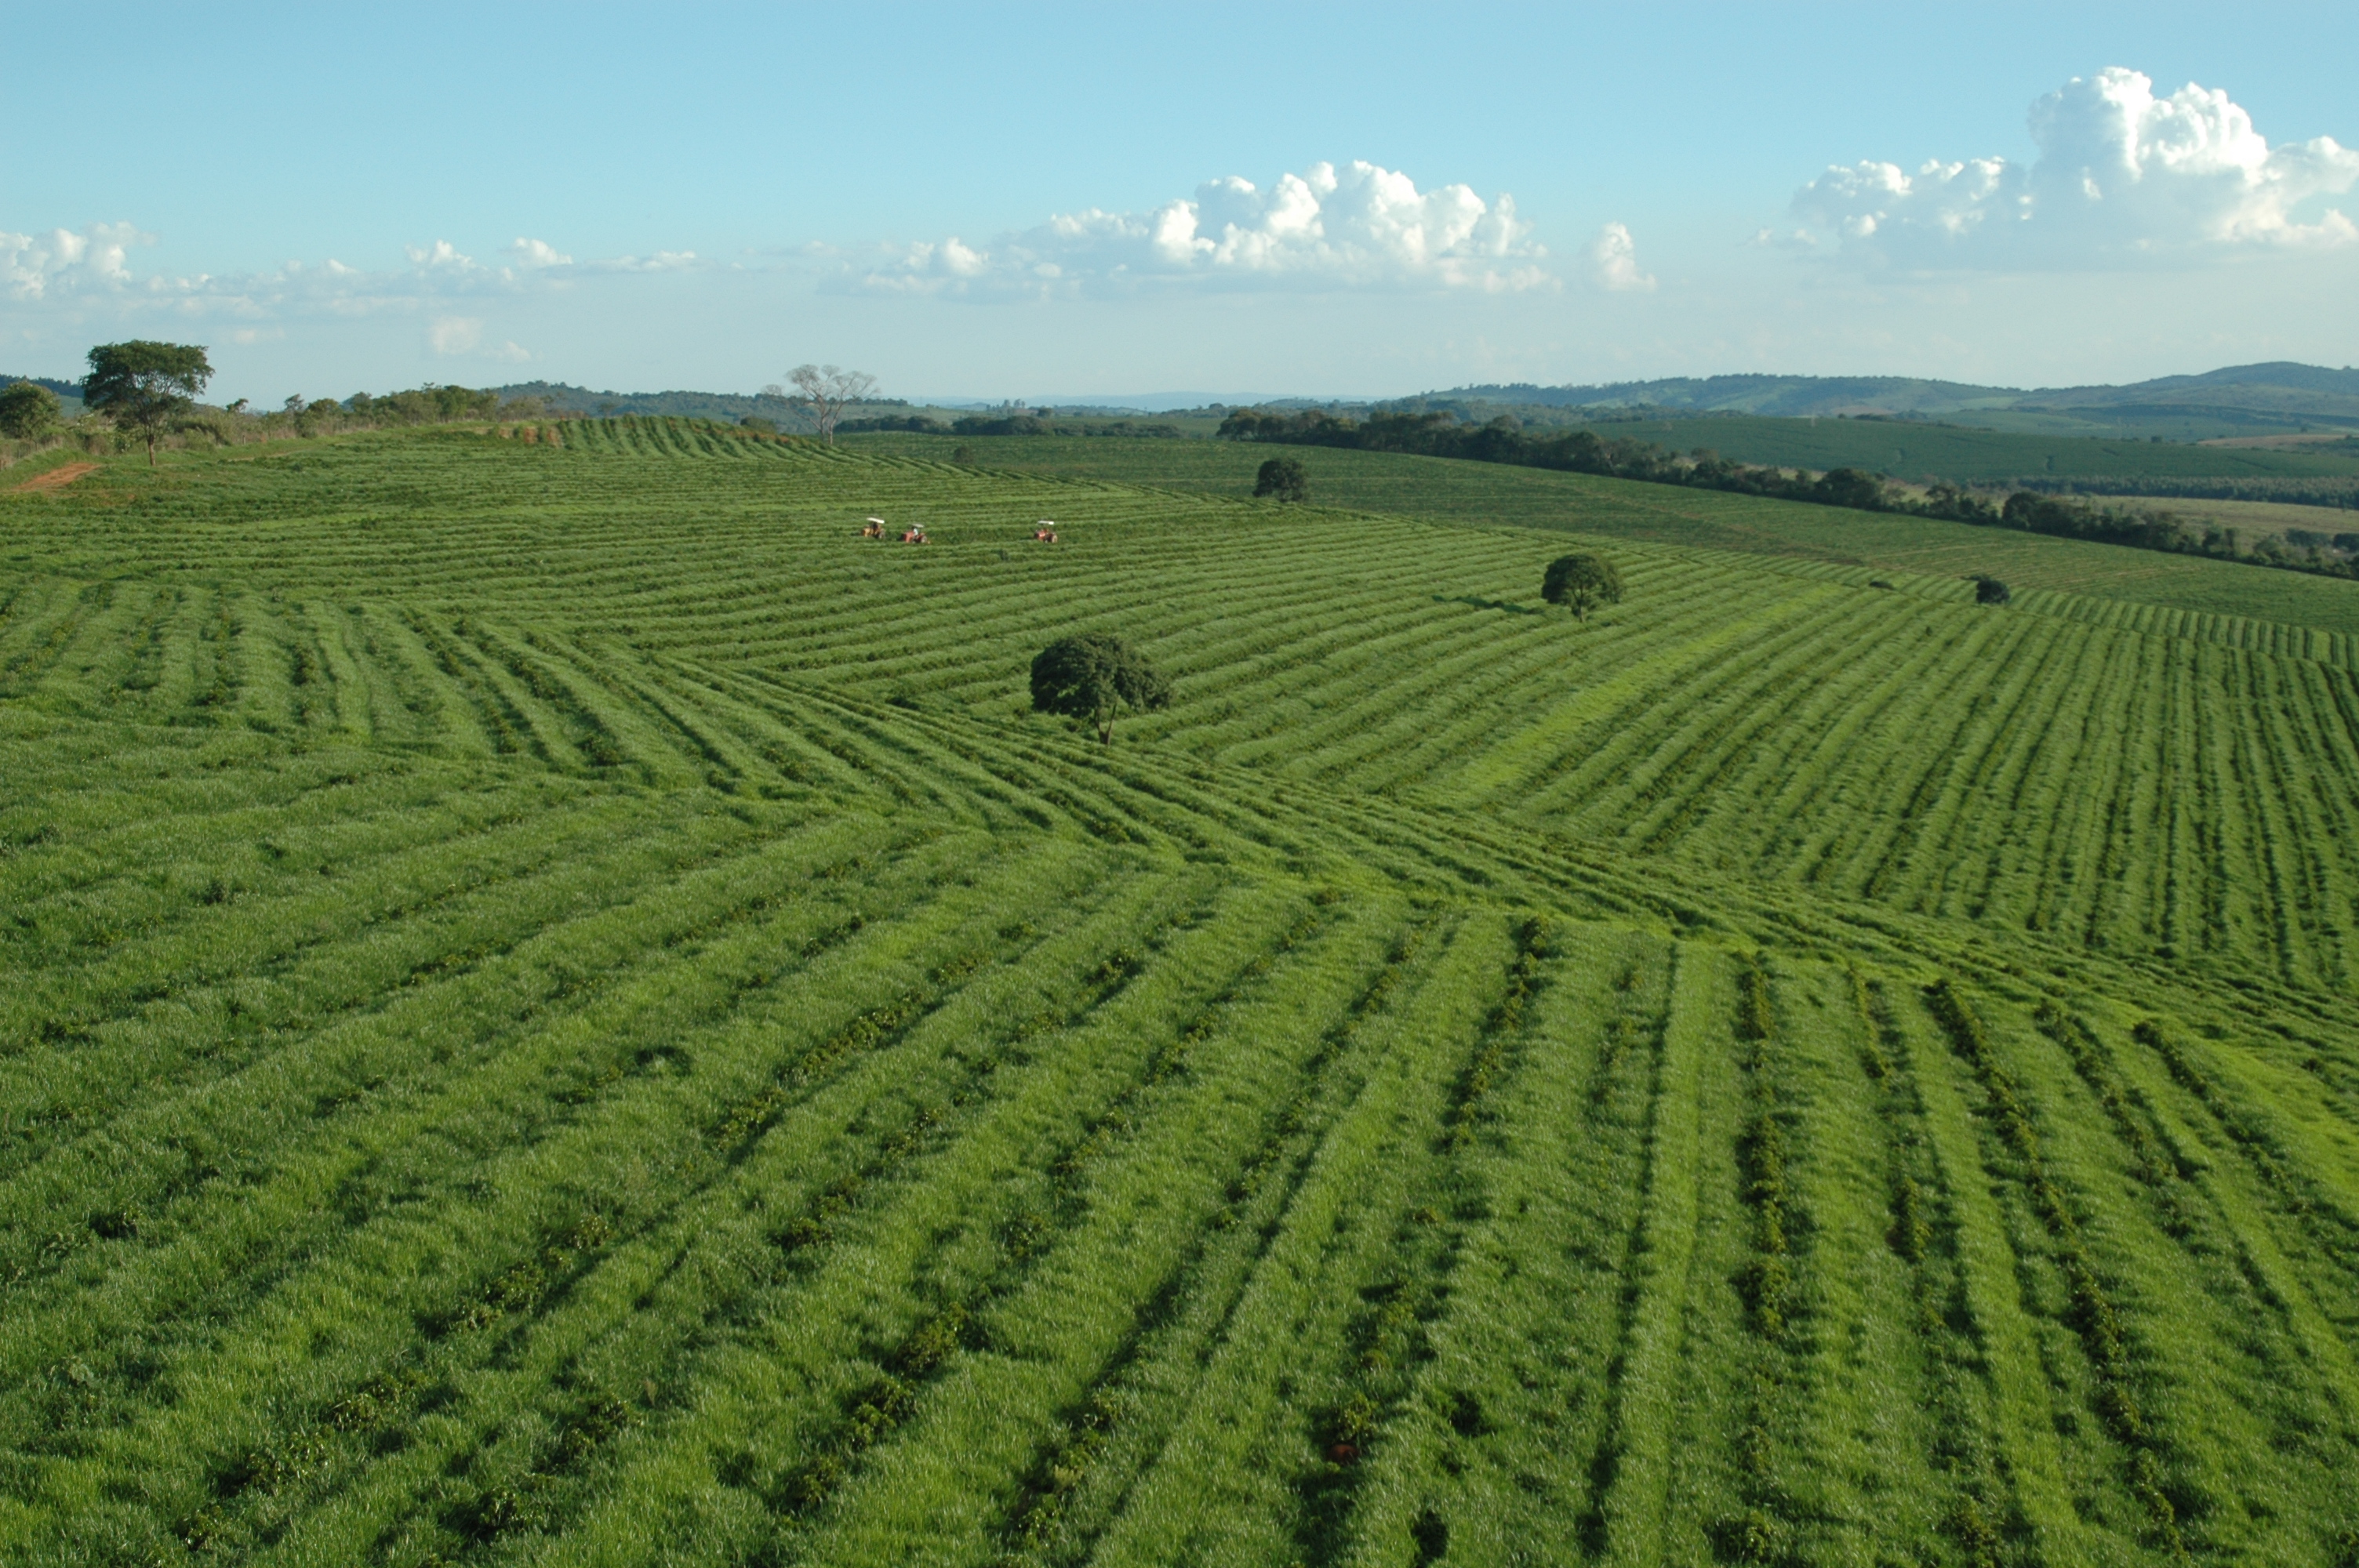 A coffee plantation in Minas Gerais. (KL Image sourced from web)